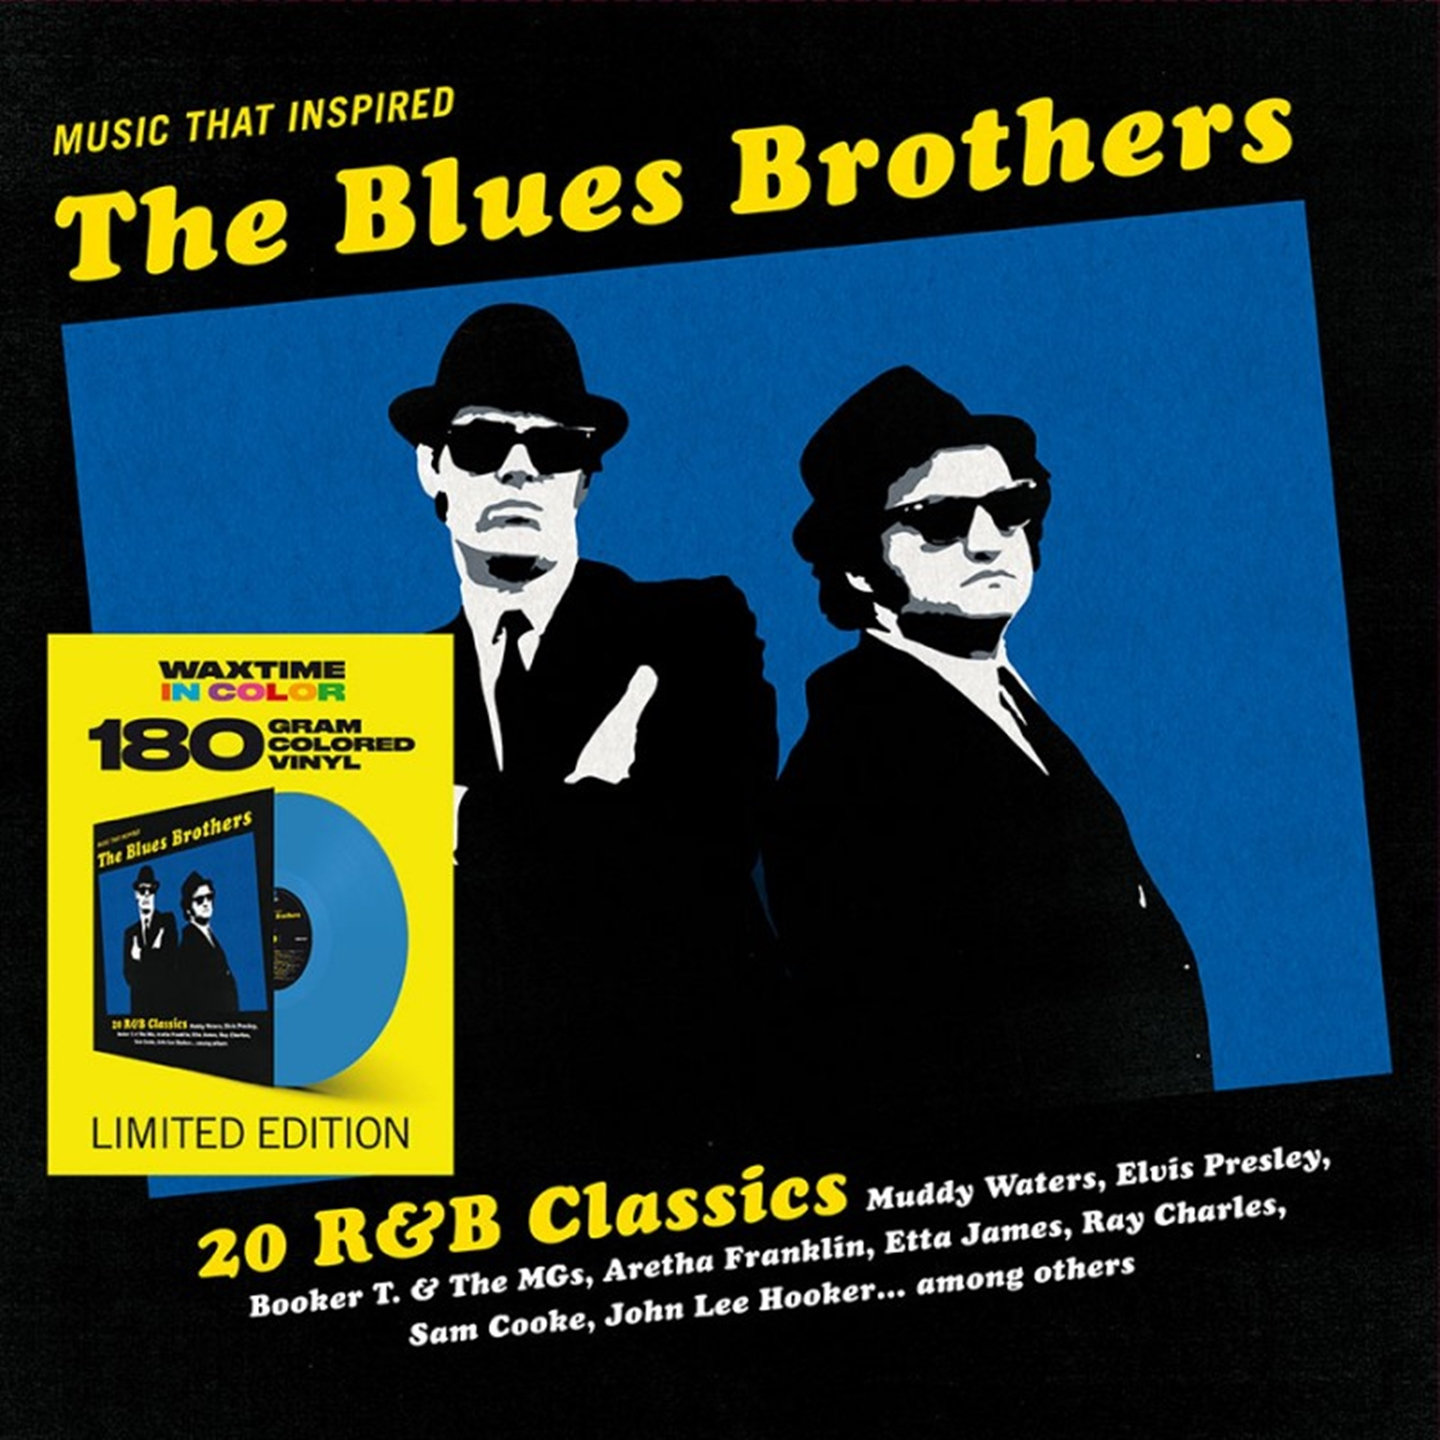 MUSIC THAT INSPIRED THE BLUES BROTHERS [LTD.ED. BLUE VINYL]